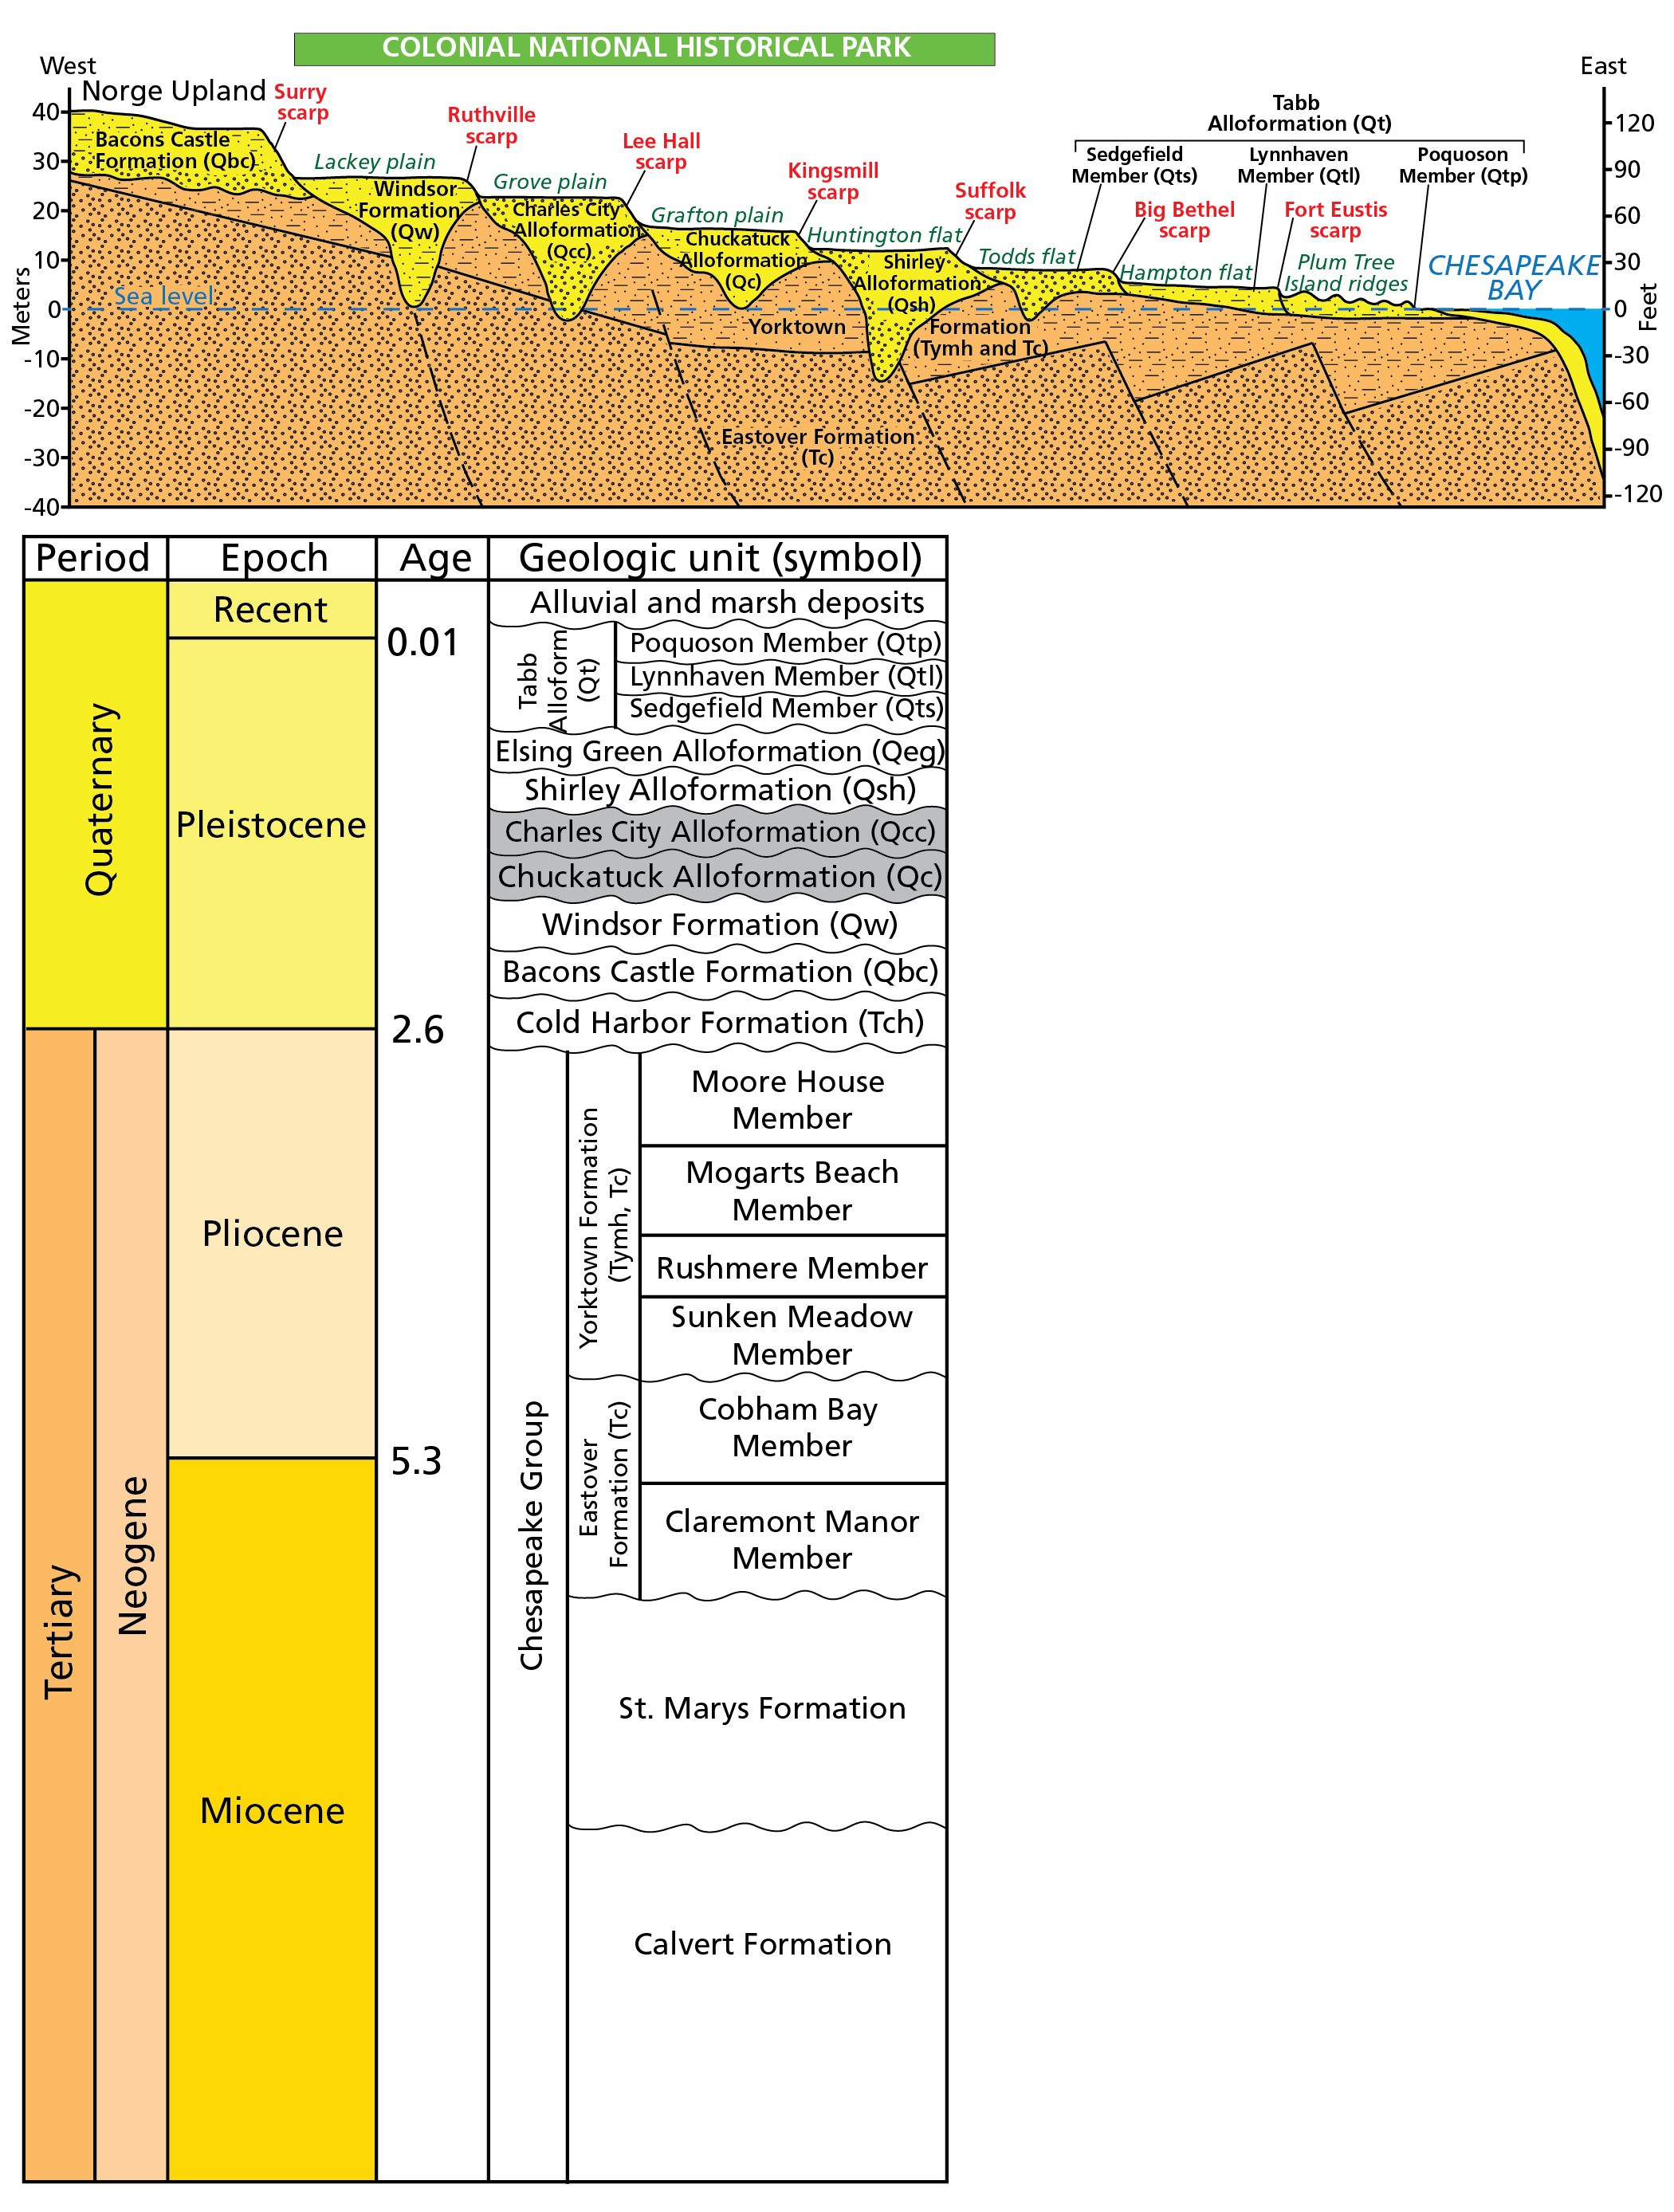 Generalized cross section and stratigraphic column of the Coastal Plain in Virginia.